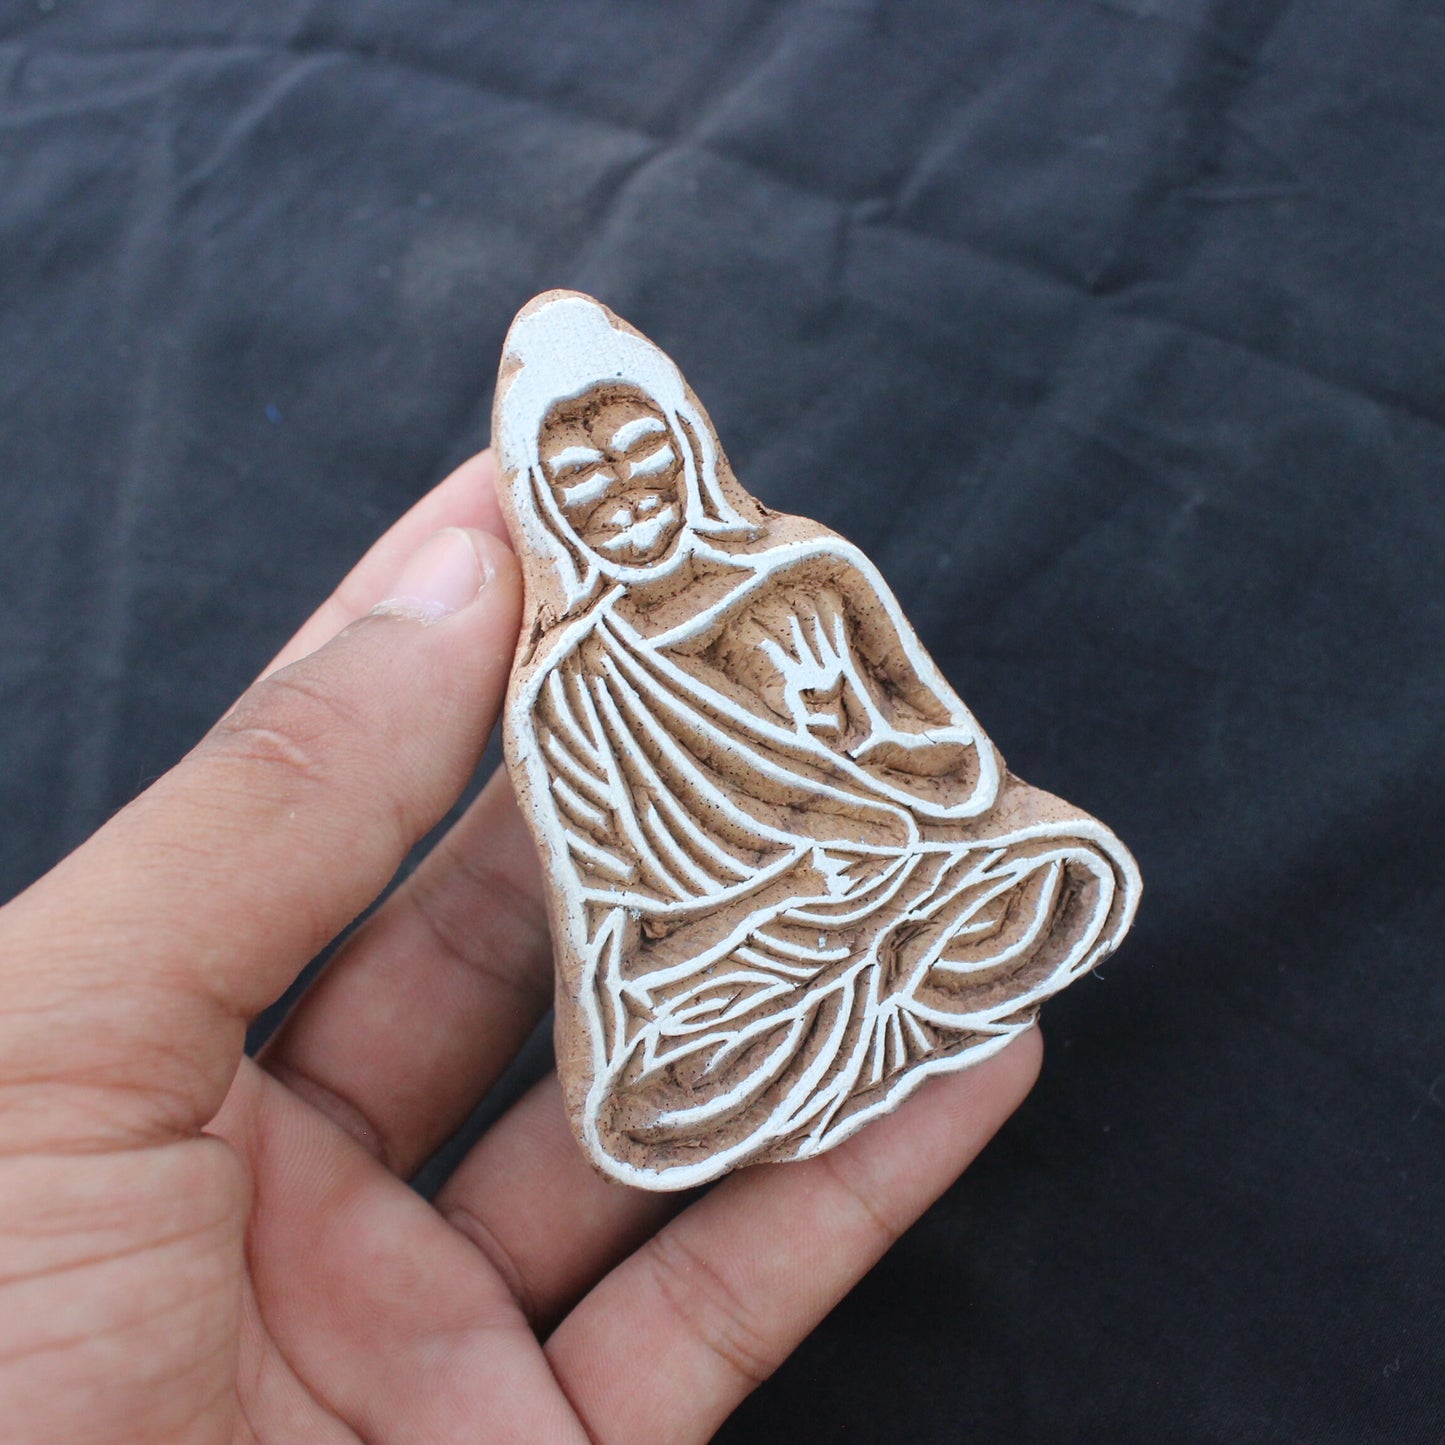 Buddha Fabric Stamp Hand Carved Fabric Stamp Meditation Fabric Stamp Carve Textile Printing Block For Printing Spiritual Soap Making Stamp